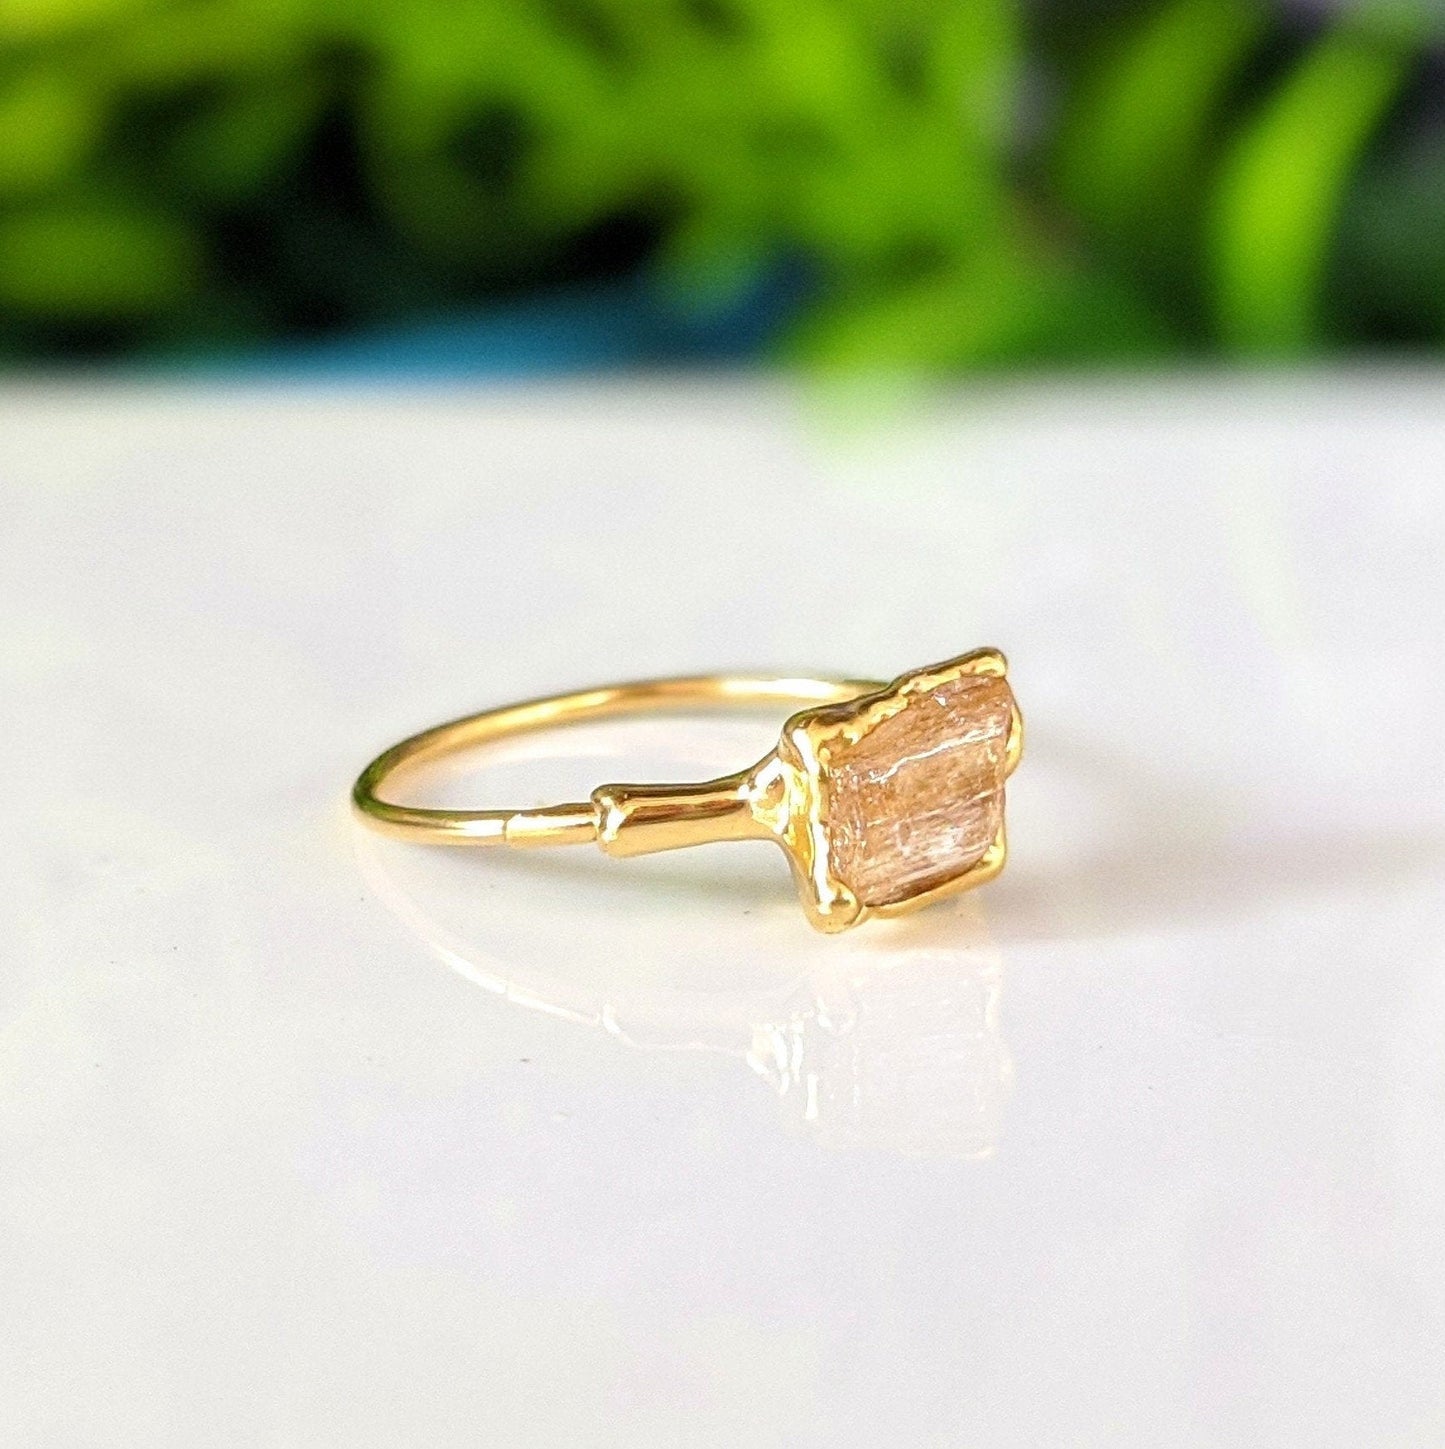 Raw Golden Imperial Topaz ring uniquely set in 18k Gold